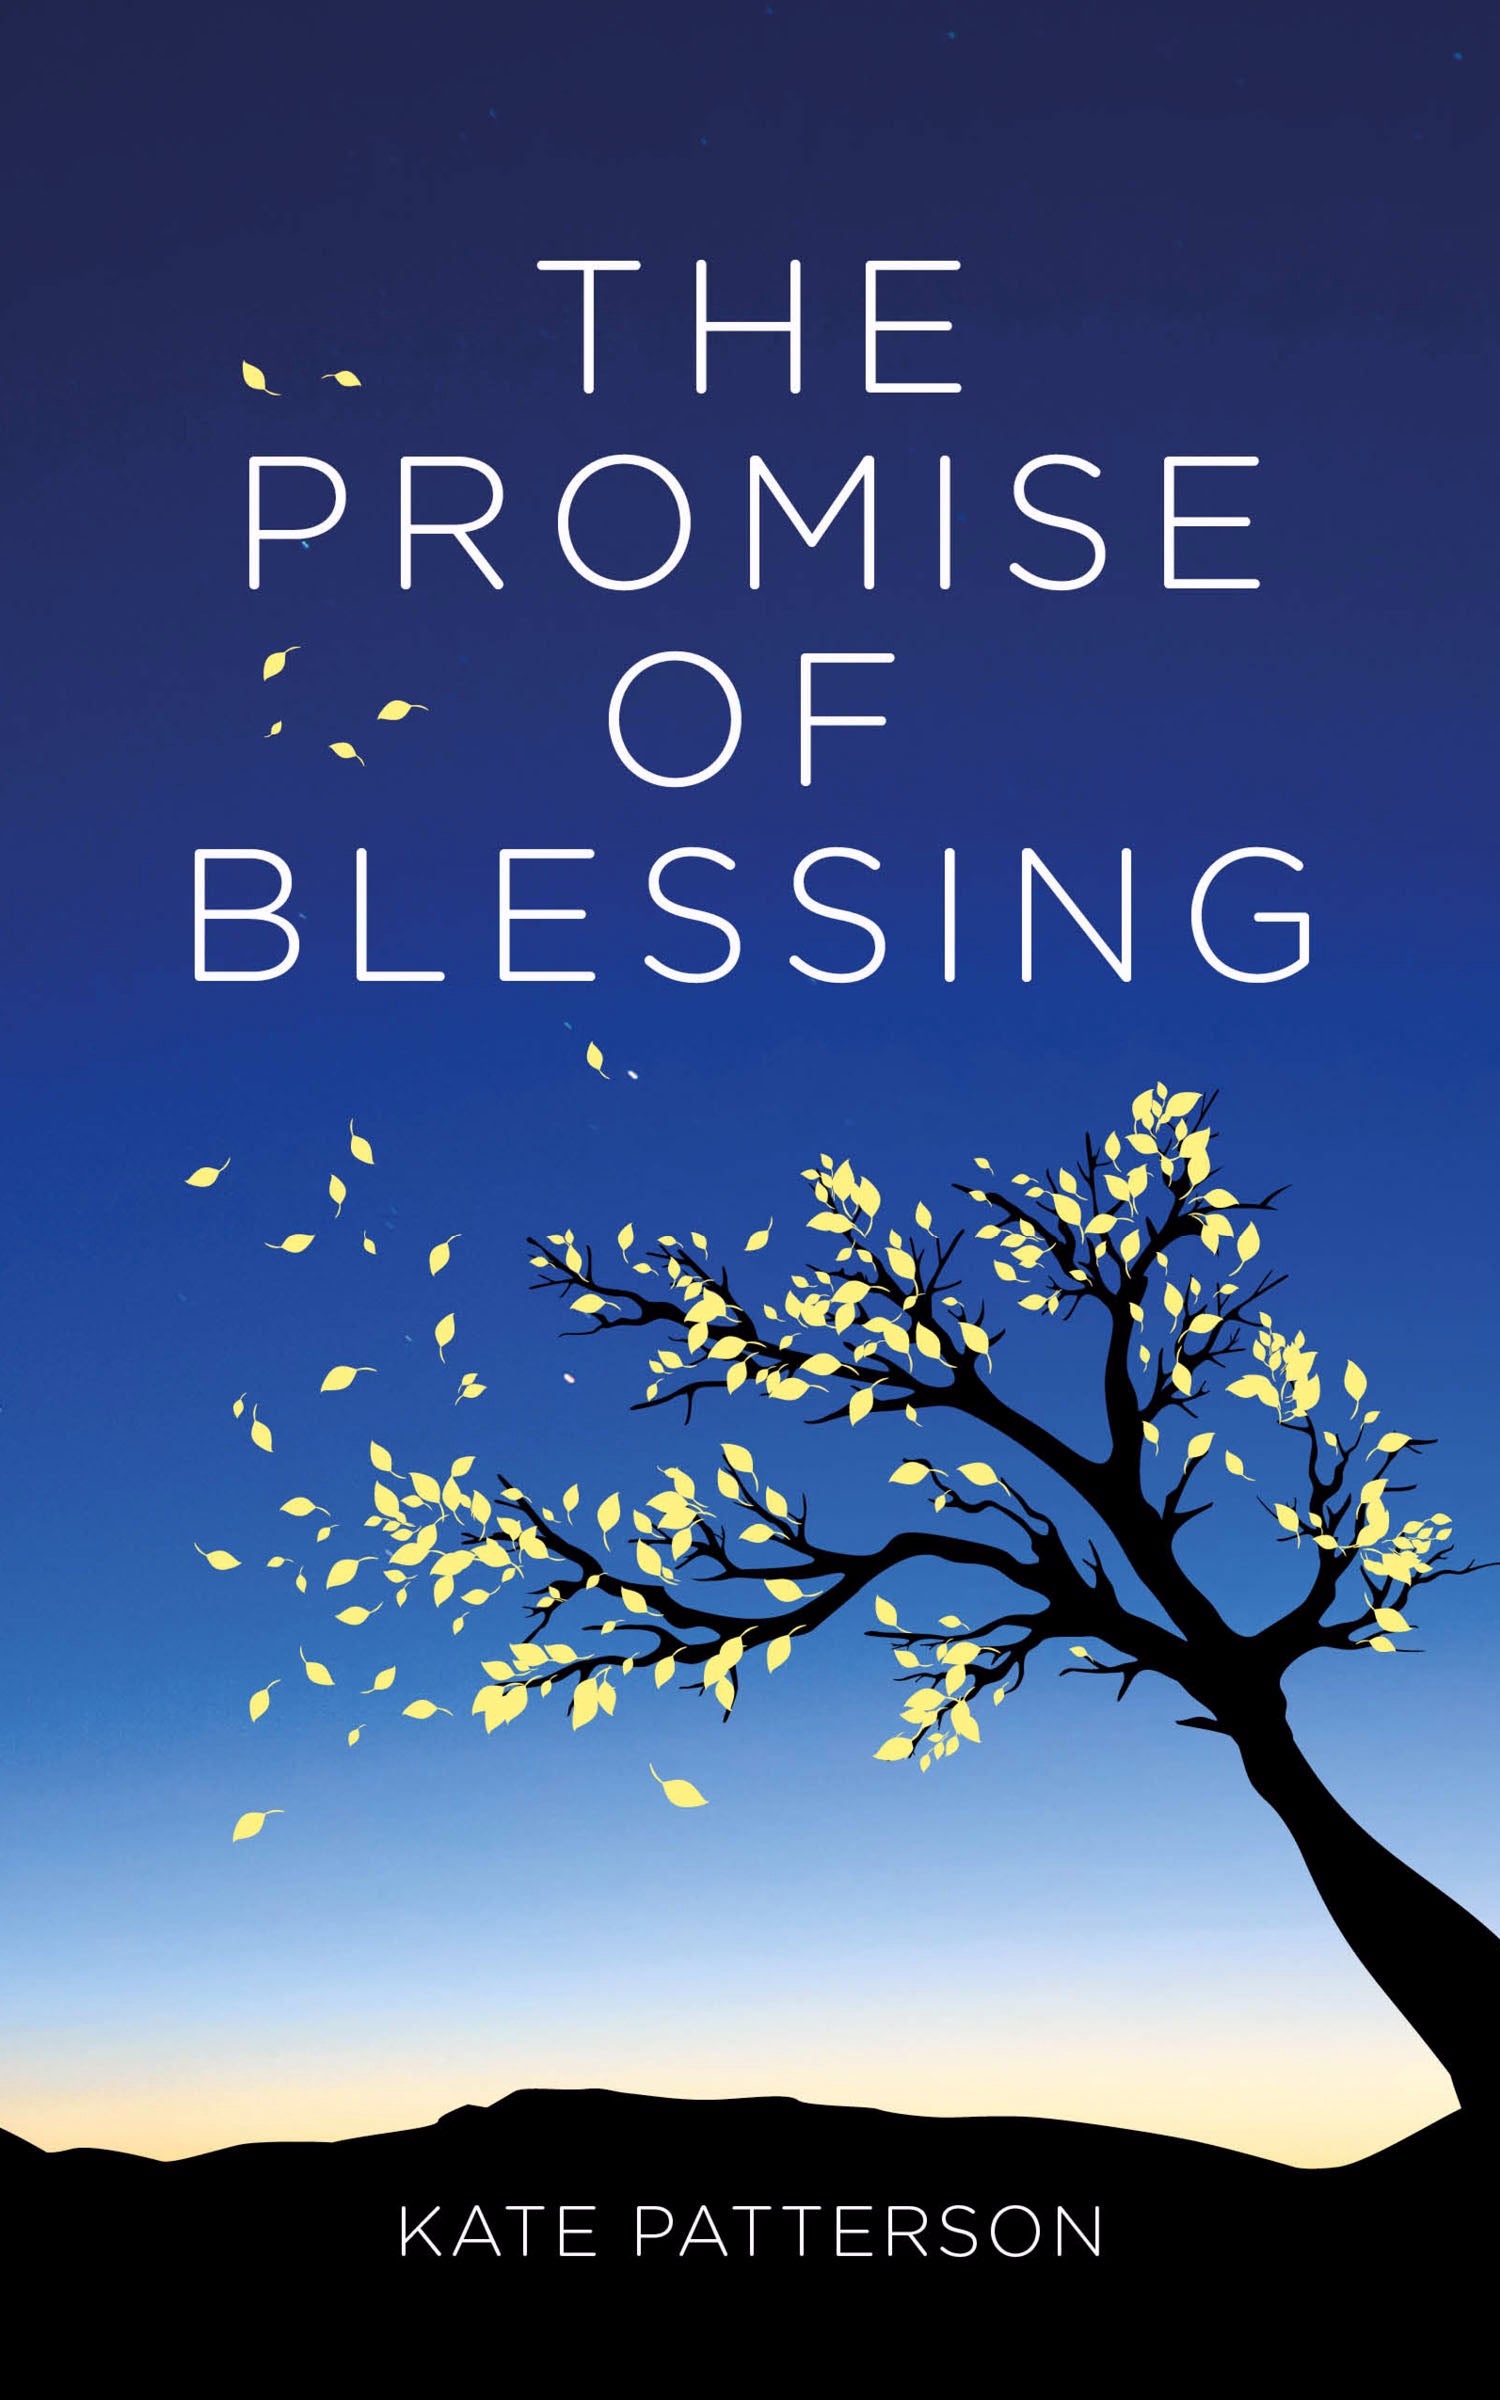 Image of The Promise of Blessing other